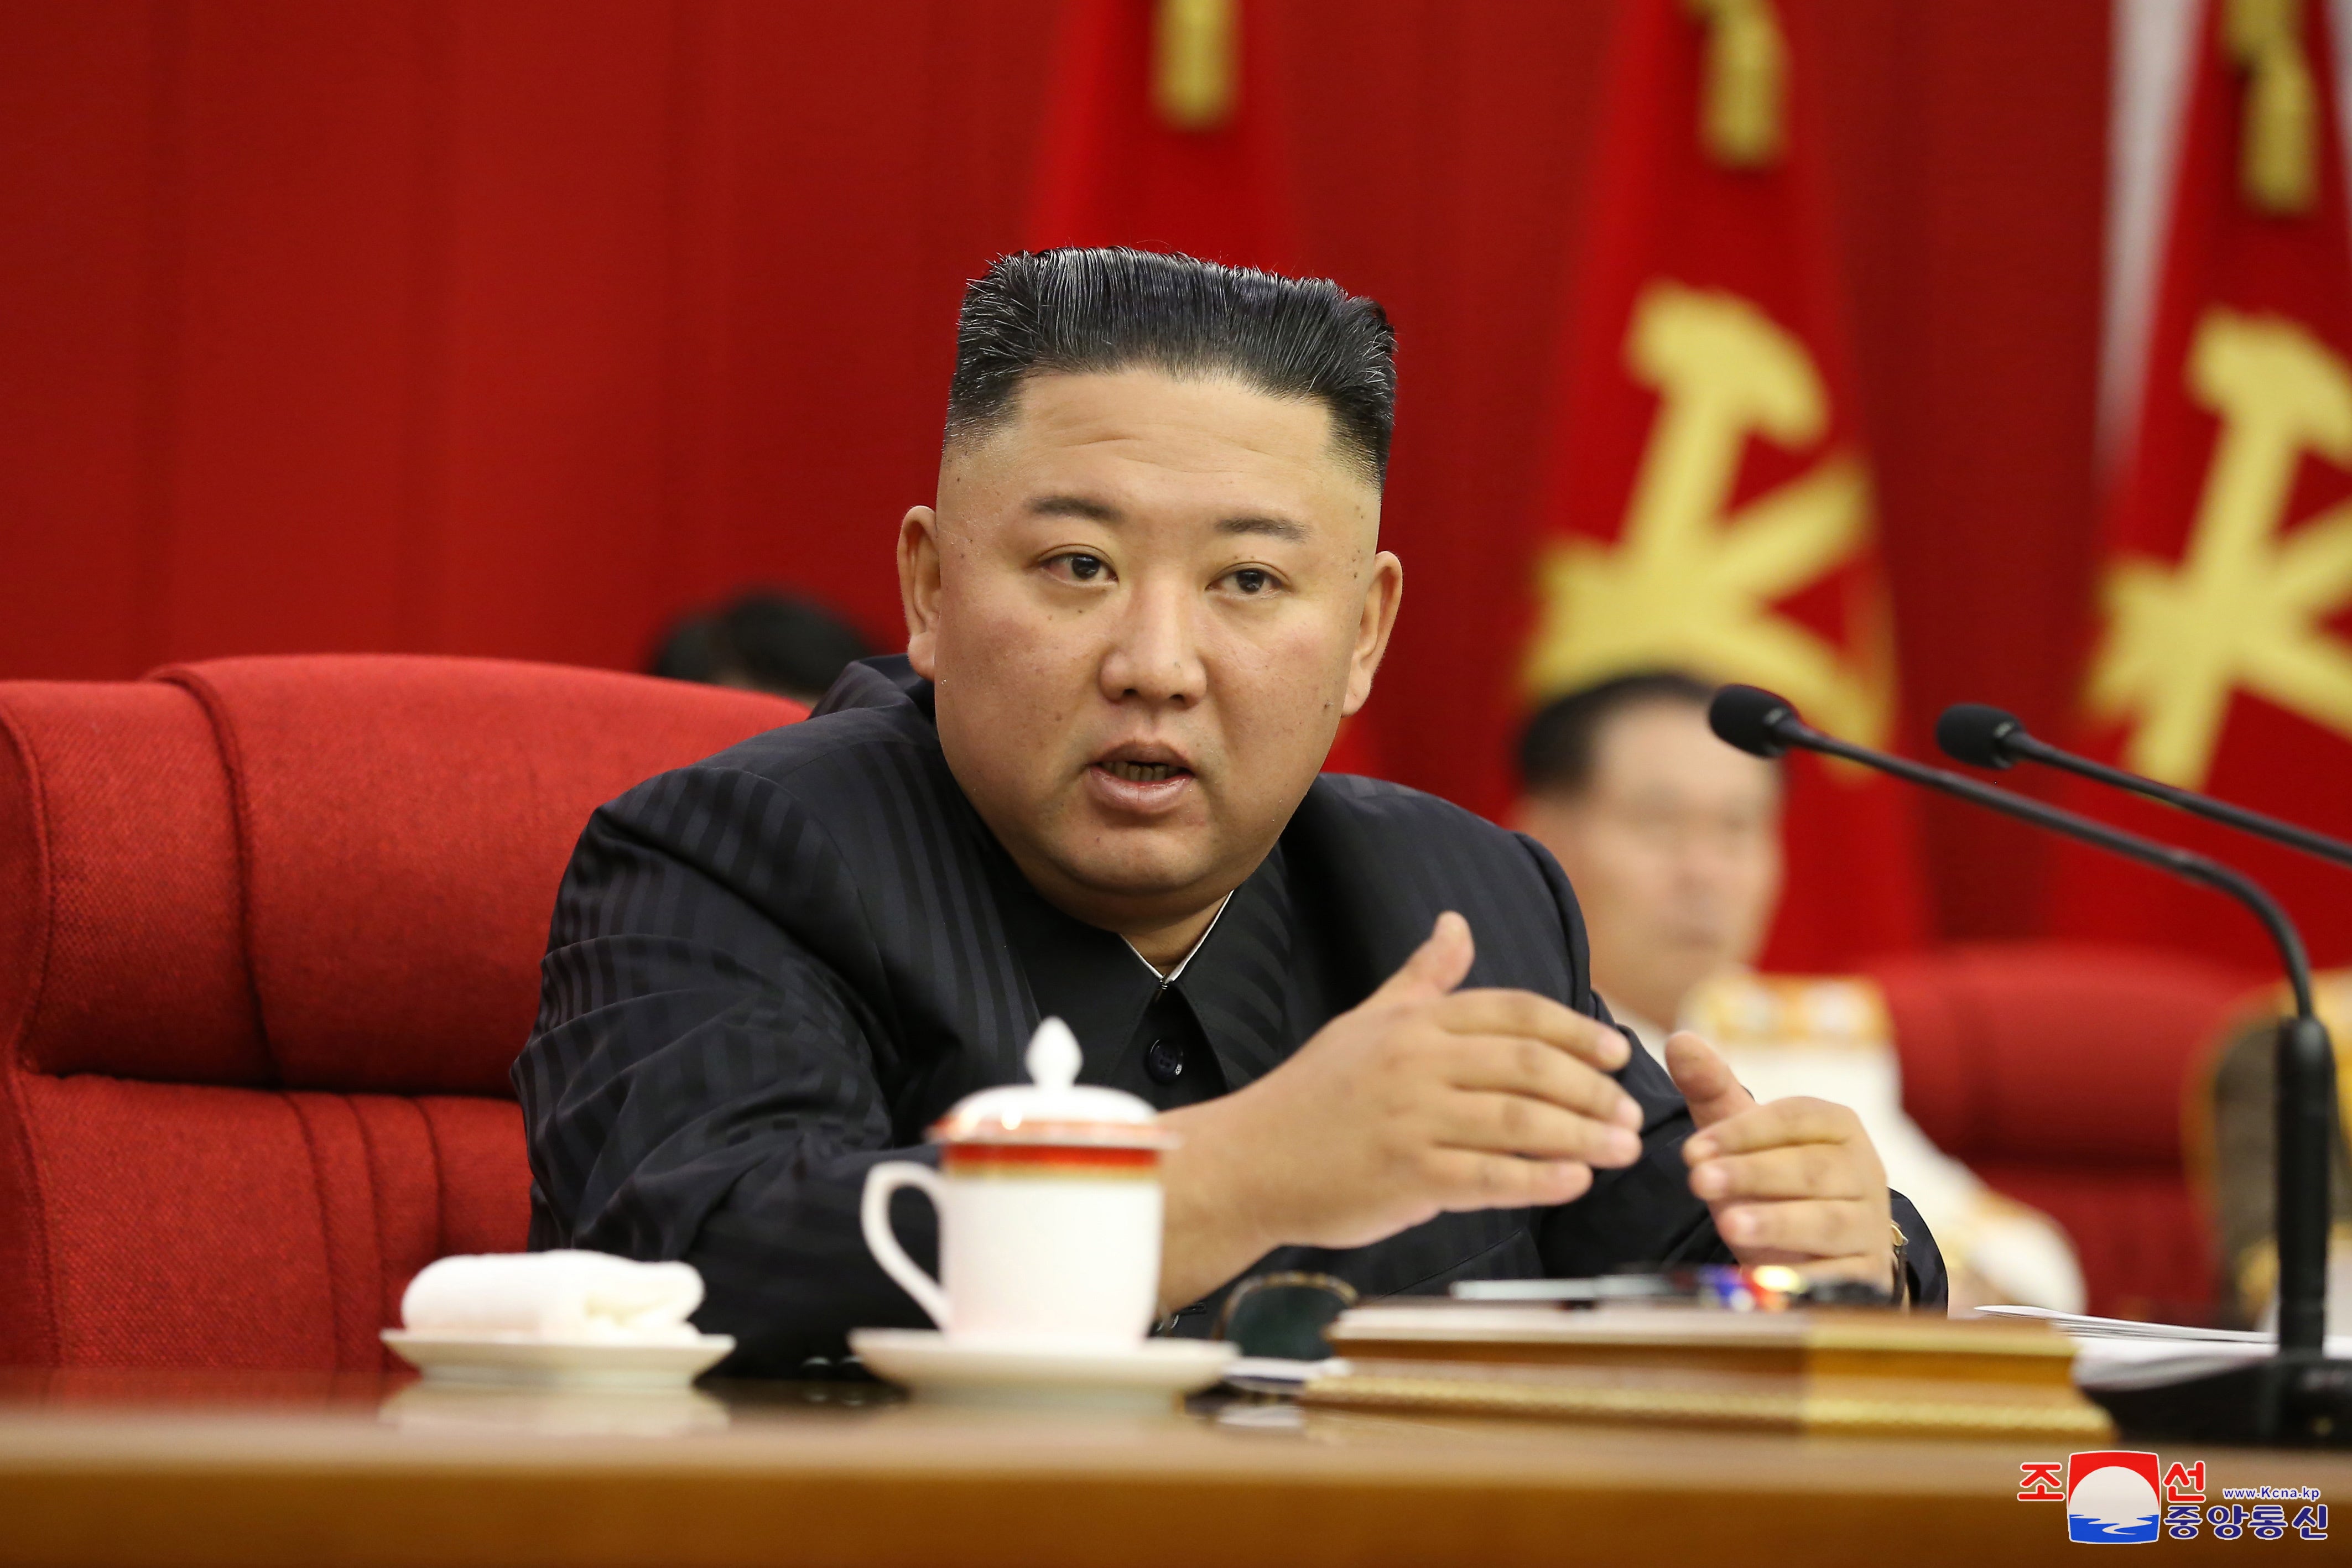 Kim Jong-un speaks on 17 June during the third day of the 3rd Plenary Meeting of the 8th Central Committee of the Workers' Party of Korea (WPK) in Pyongyang